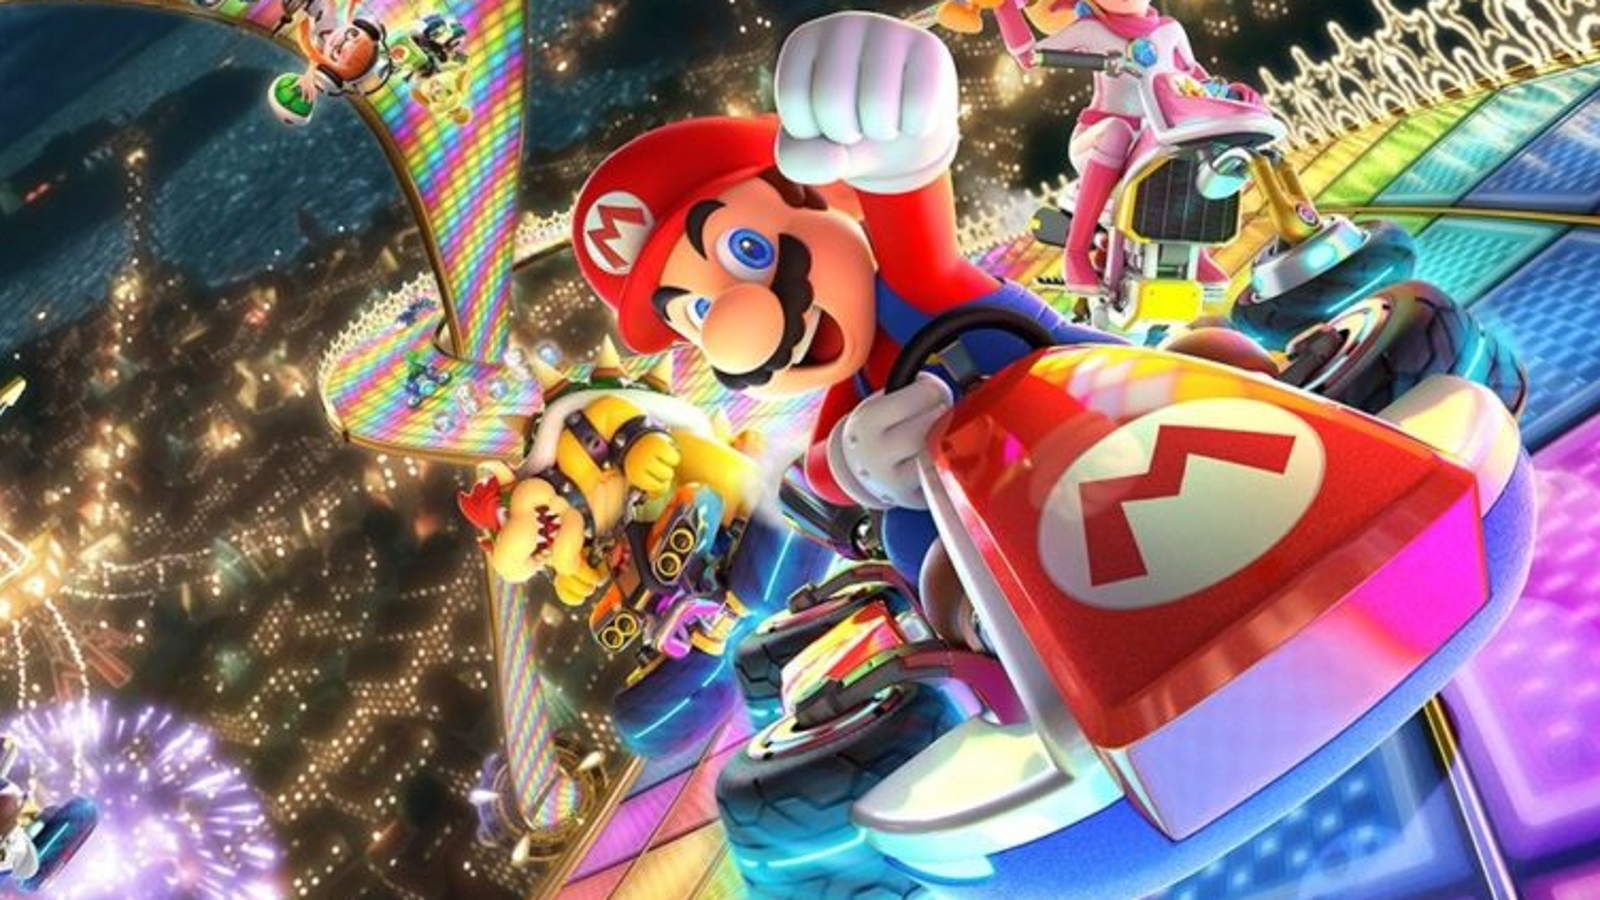 Mario Kart 8 Deluxe is adding 48 newly remastered classic courses